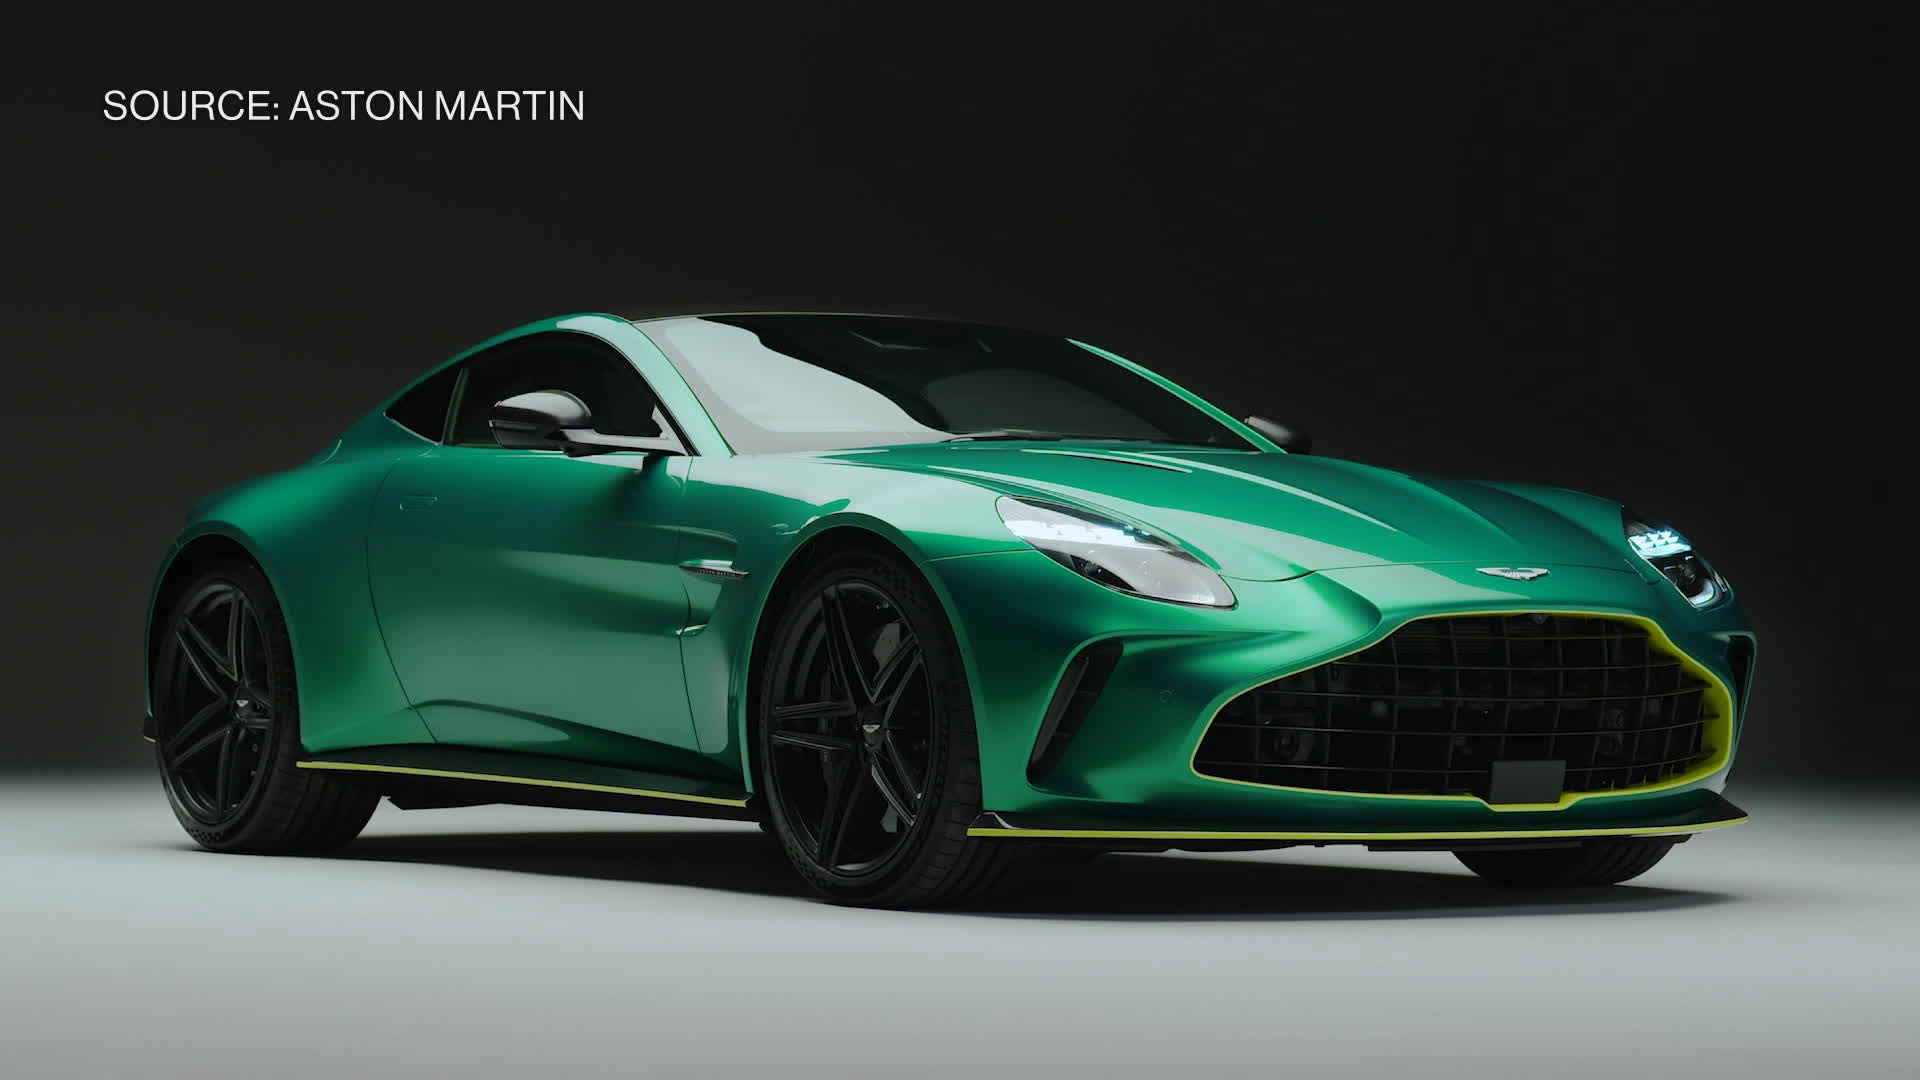 Aston Martin Wants to Win and to Sell Cars, Too - The New York Times